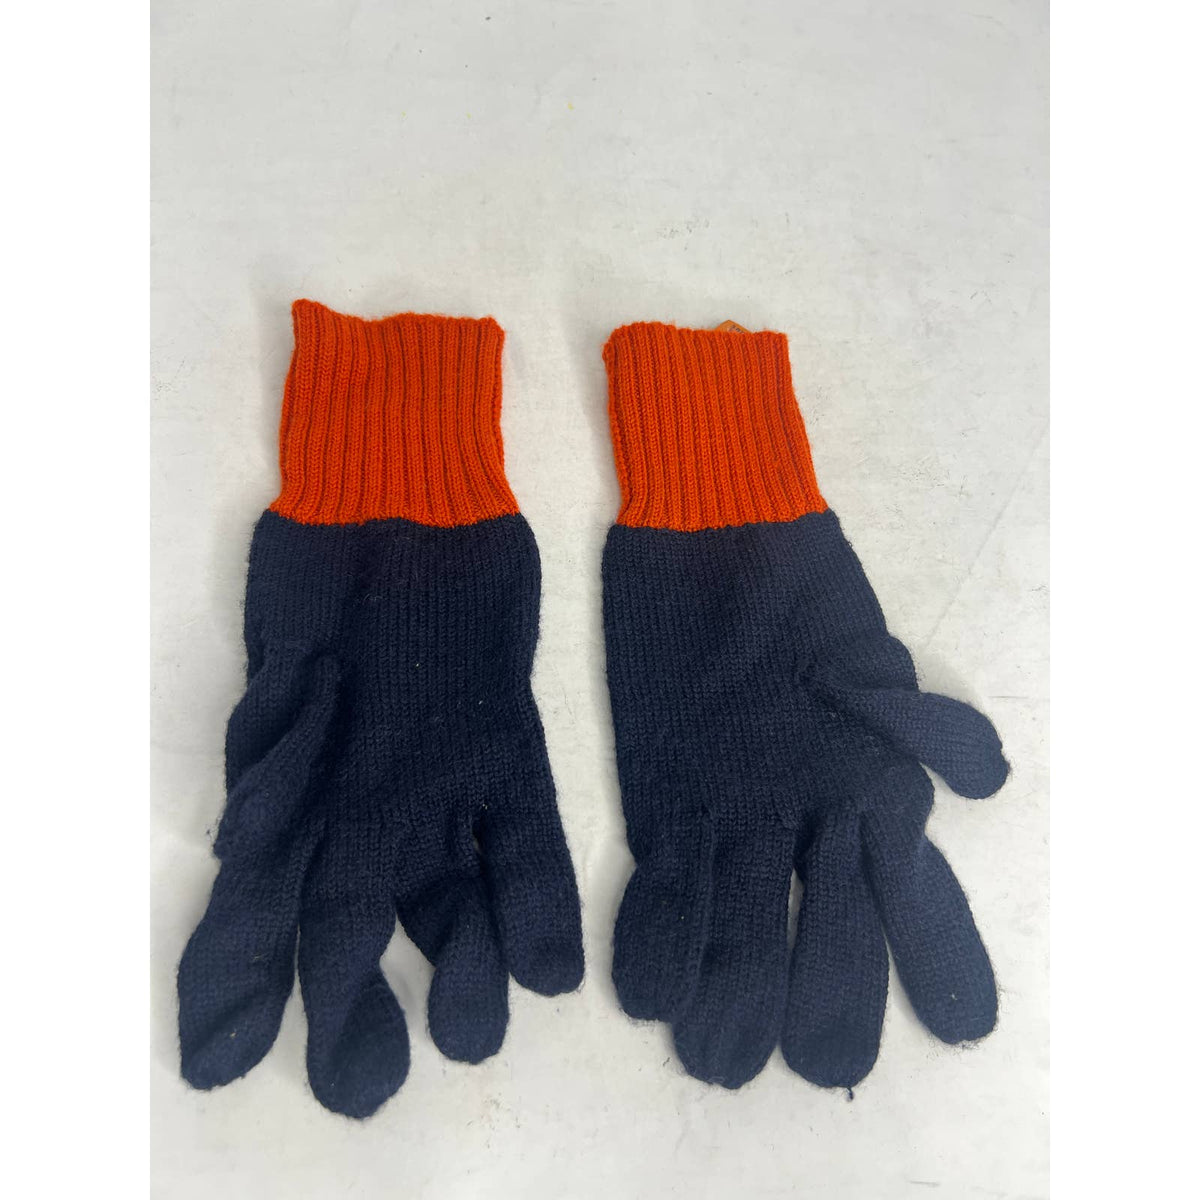 Tory Burch Blue and Orange Gloves 100% Wool